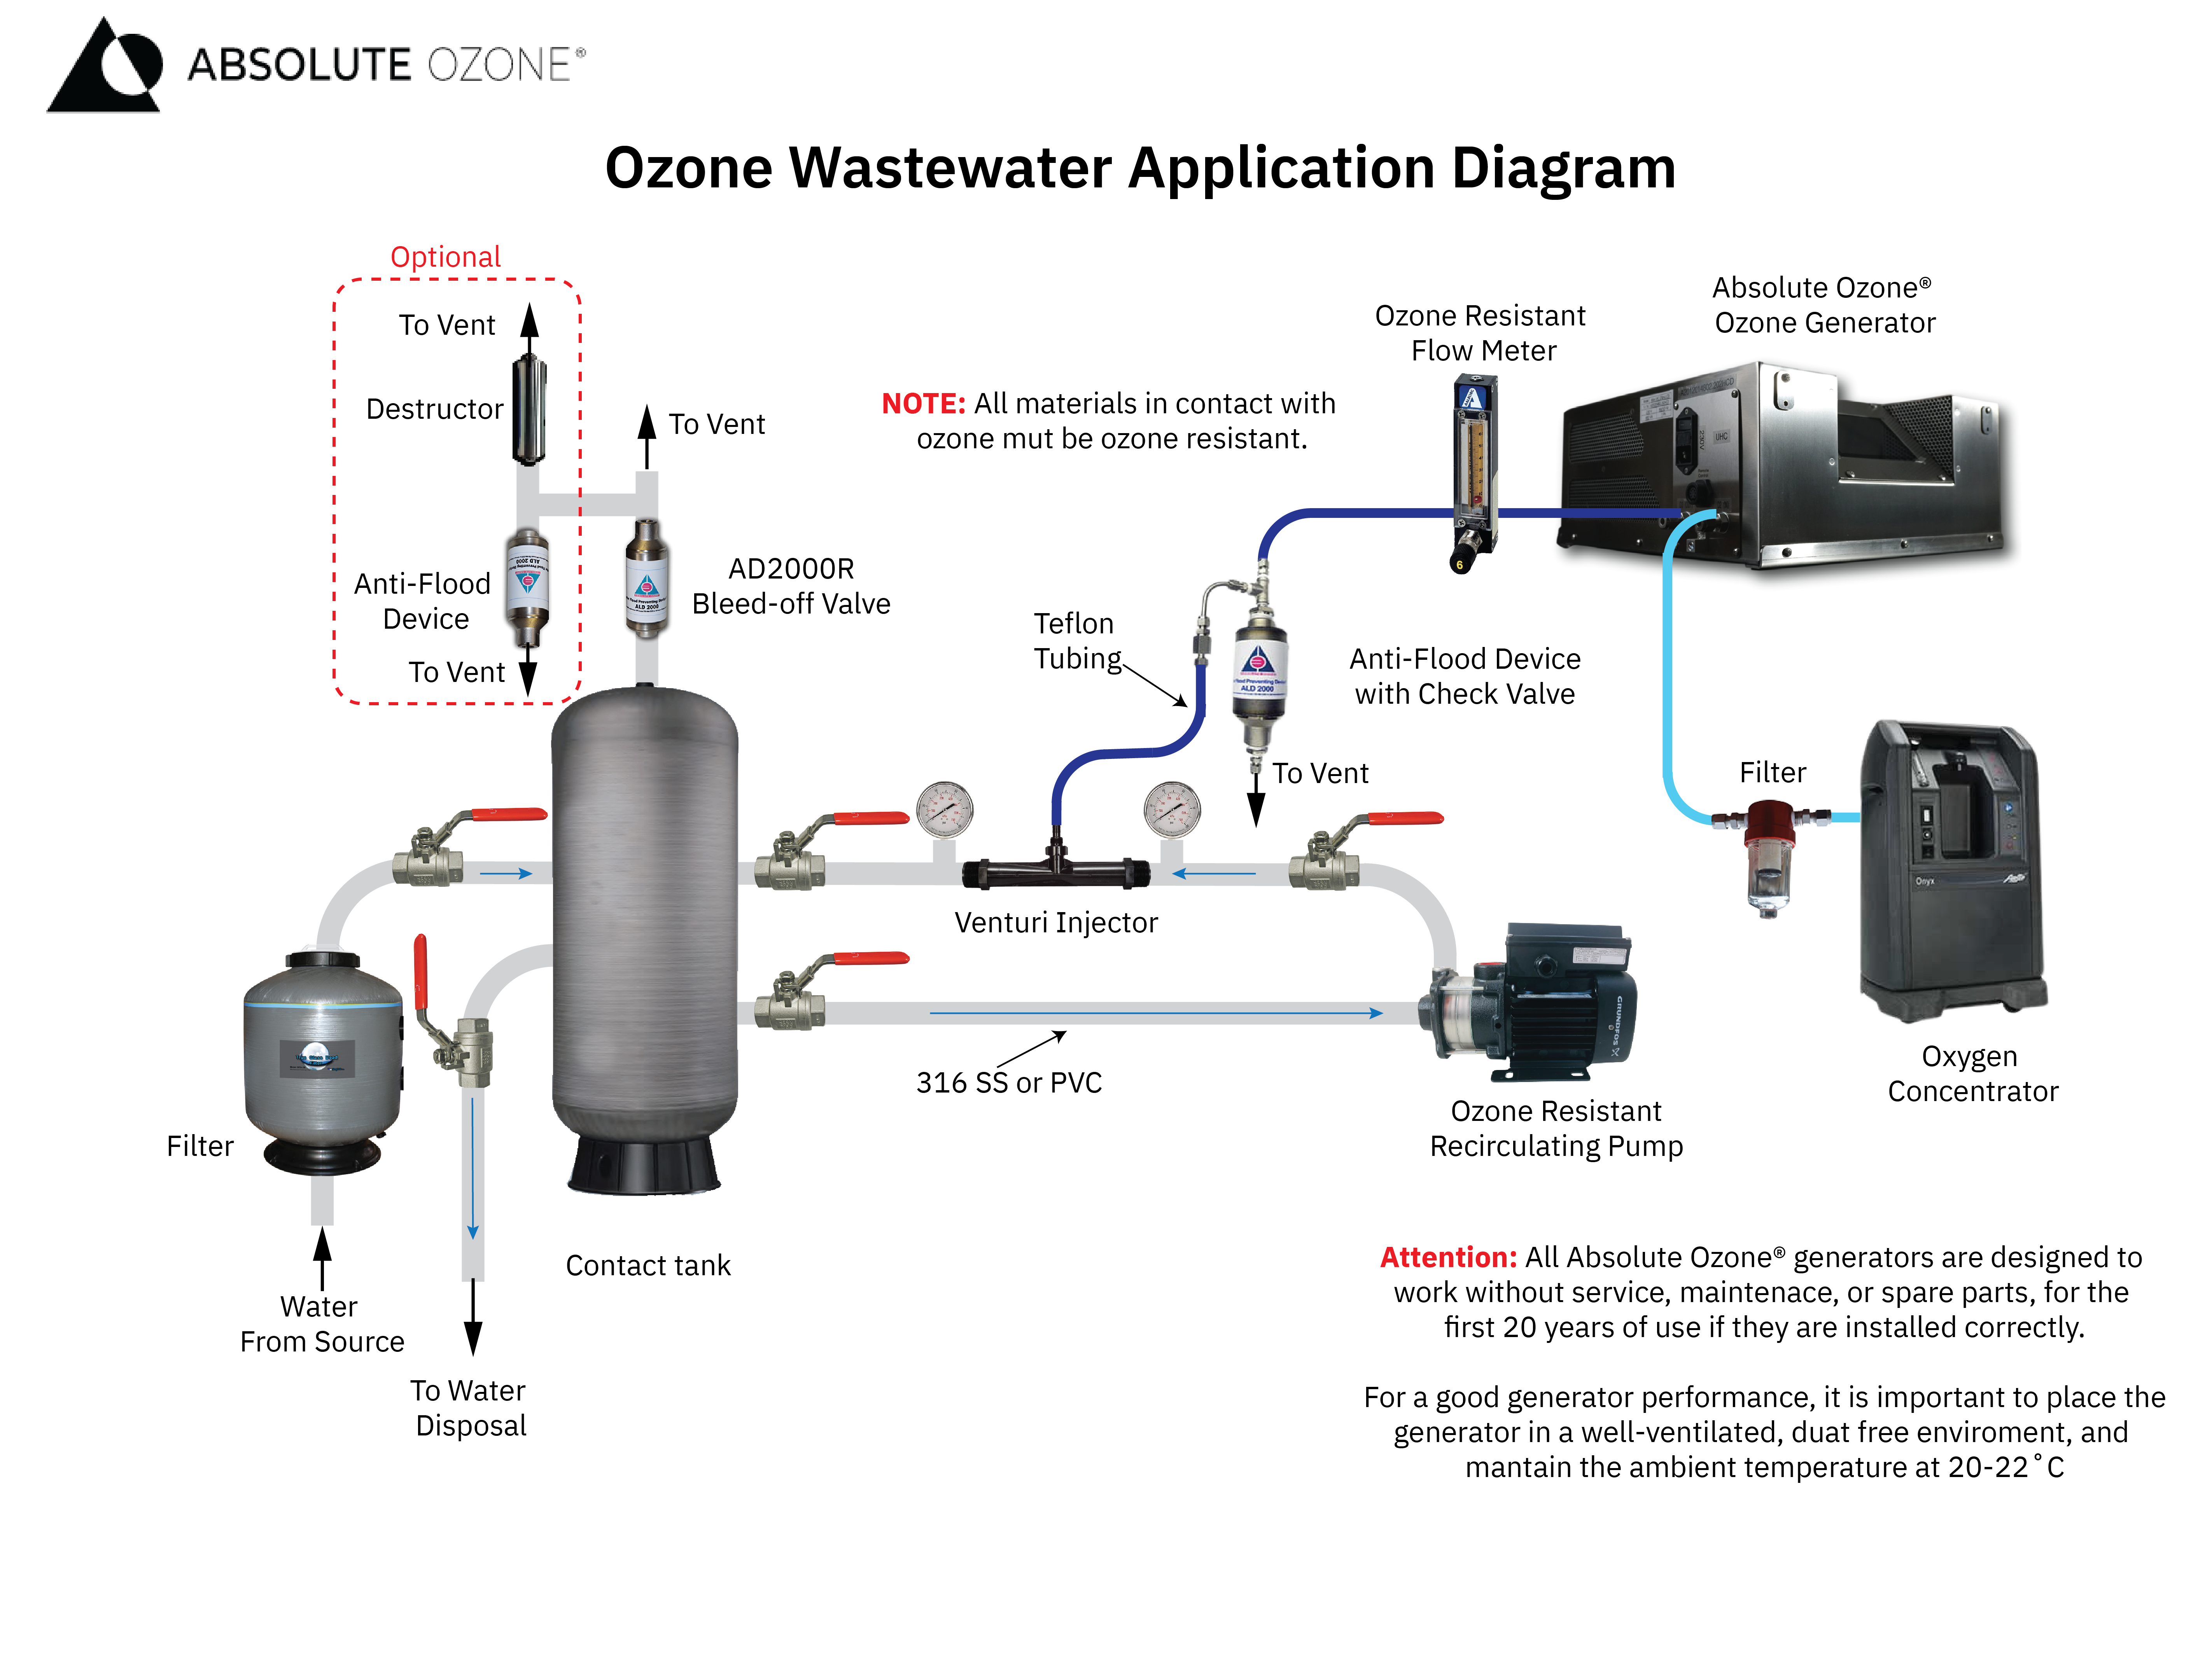 Wastewater Treatment | Absolute Ozone